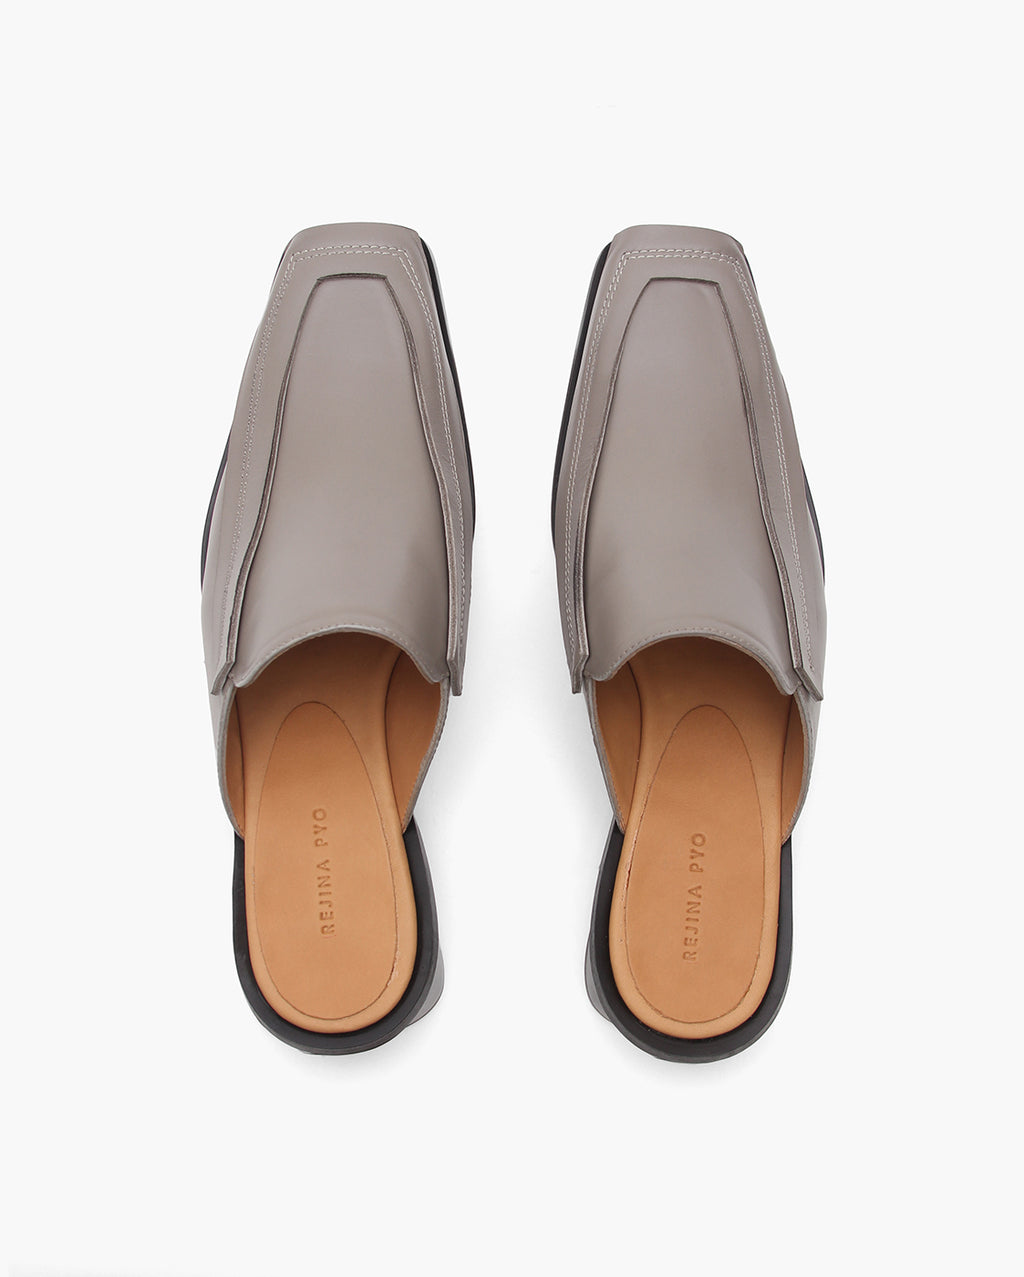 Miki Mule 30mm Leather Dark Taupe - Special Price